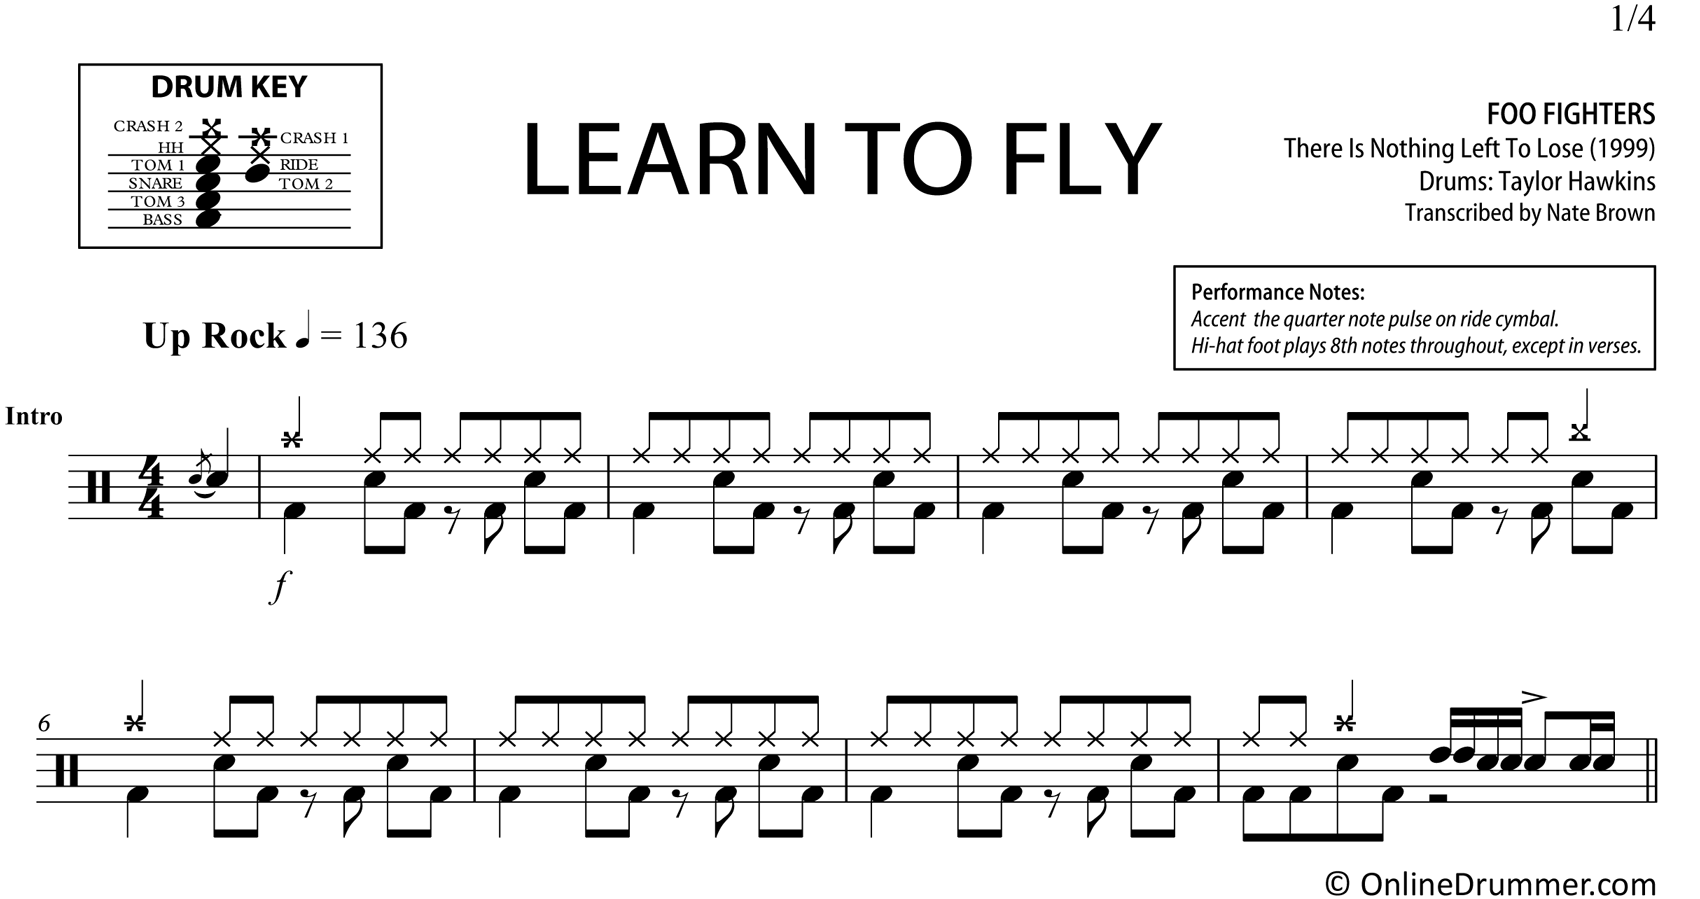 Learn To Fly - Foo Fighters - Drum Sheet Music